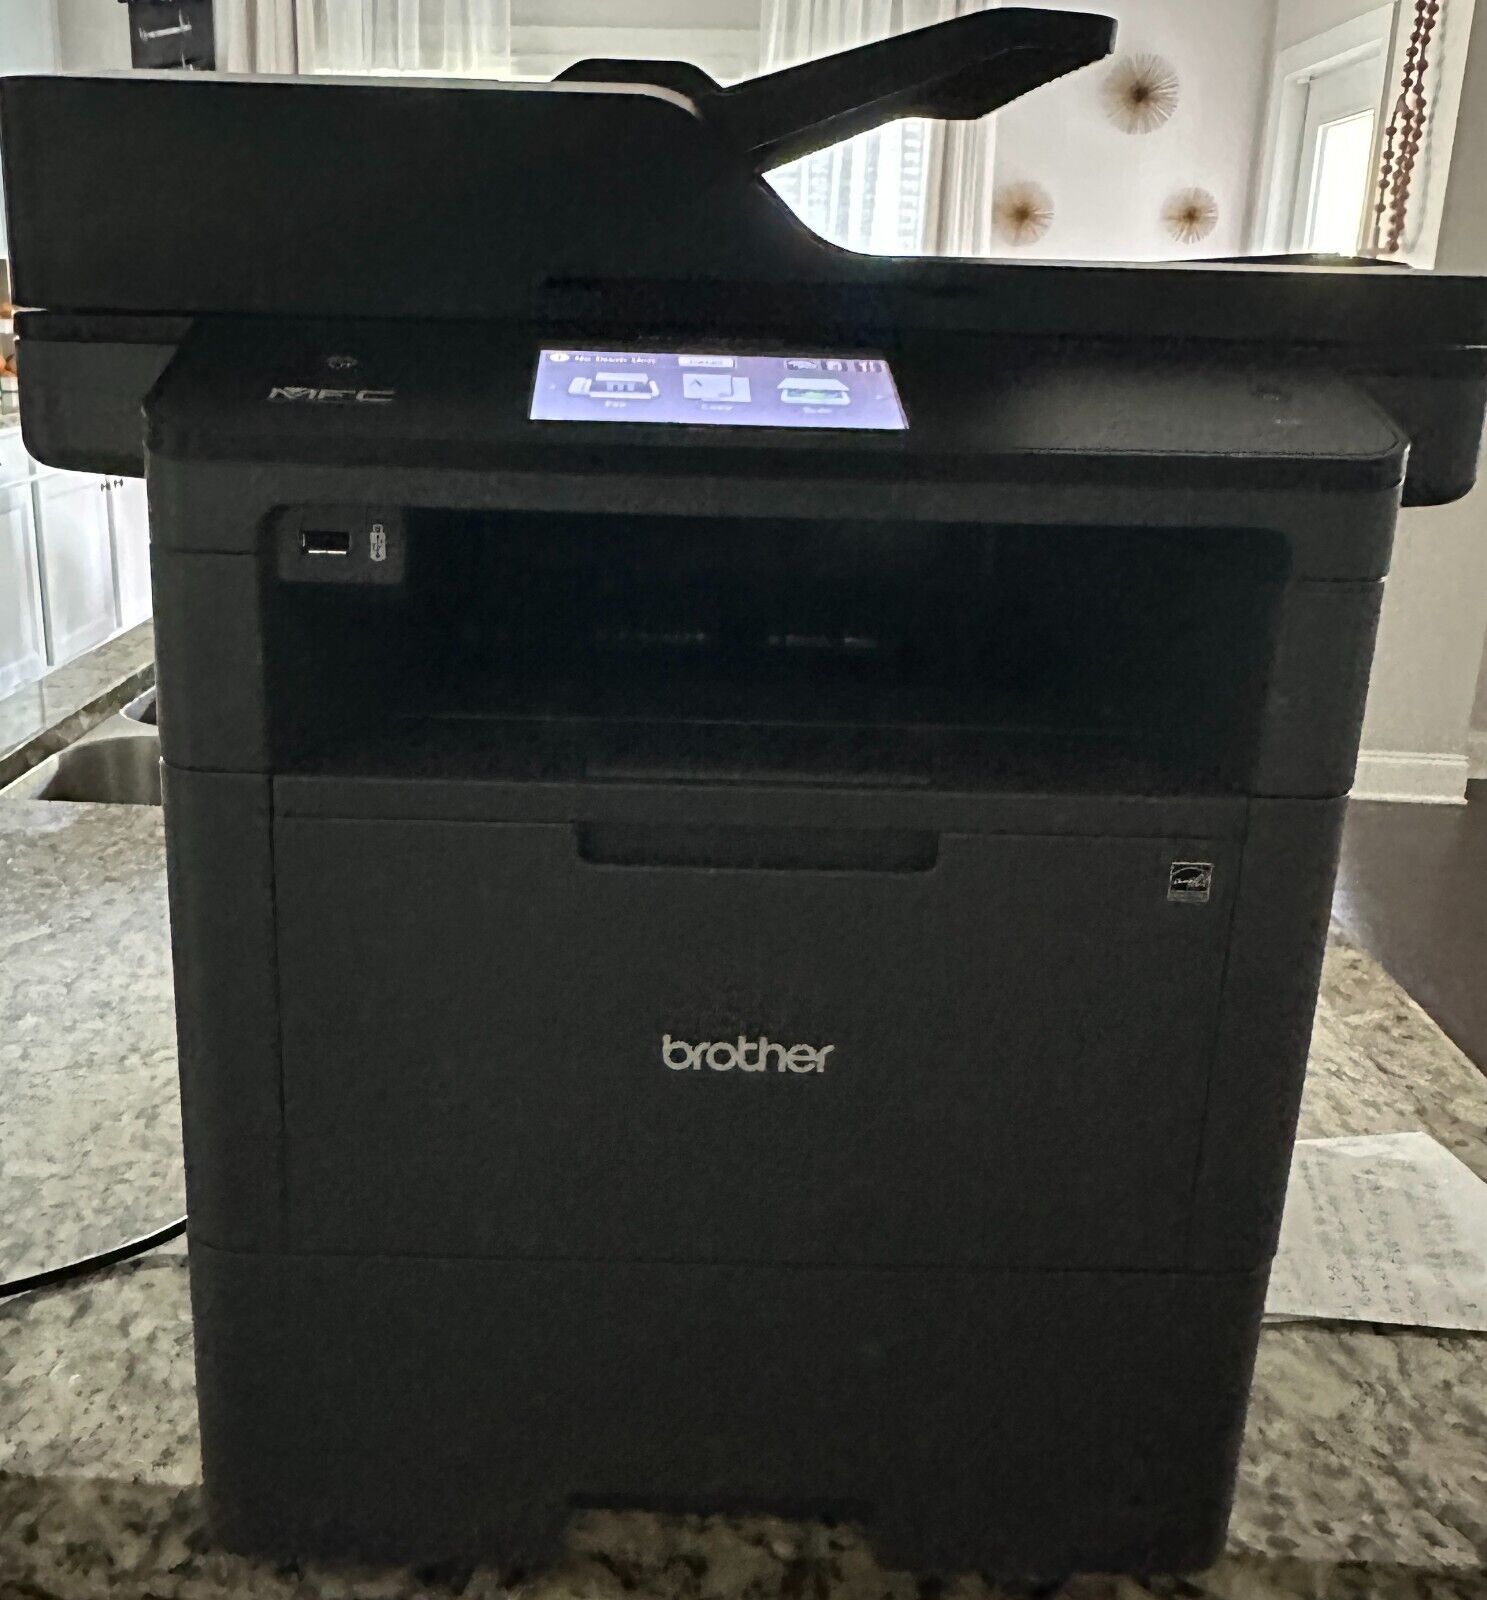 Genuine Brother MFC-L6800DW All in One Monochrome Laser Printer